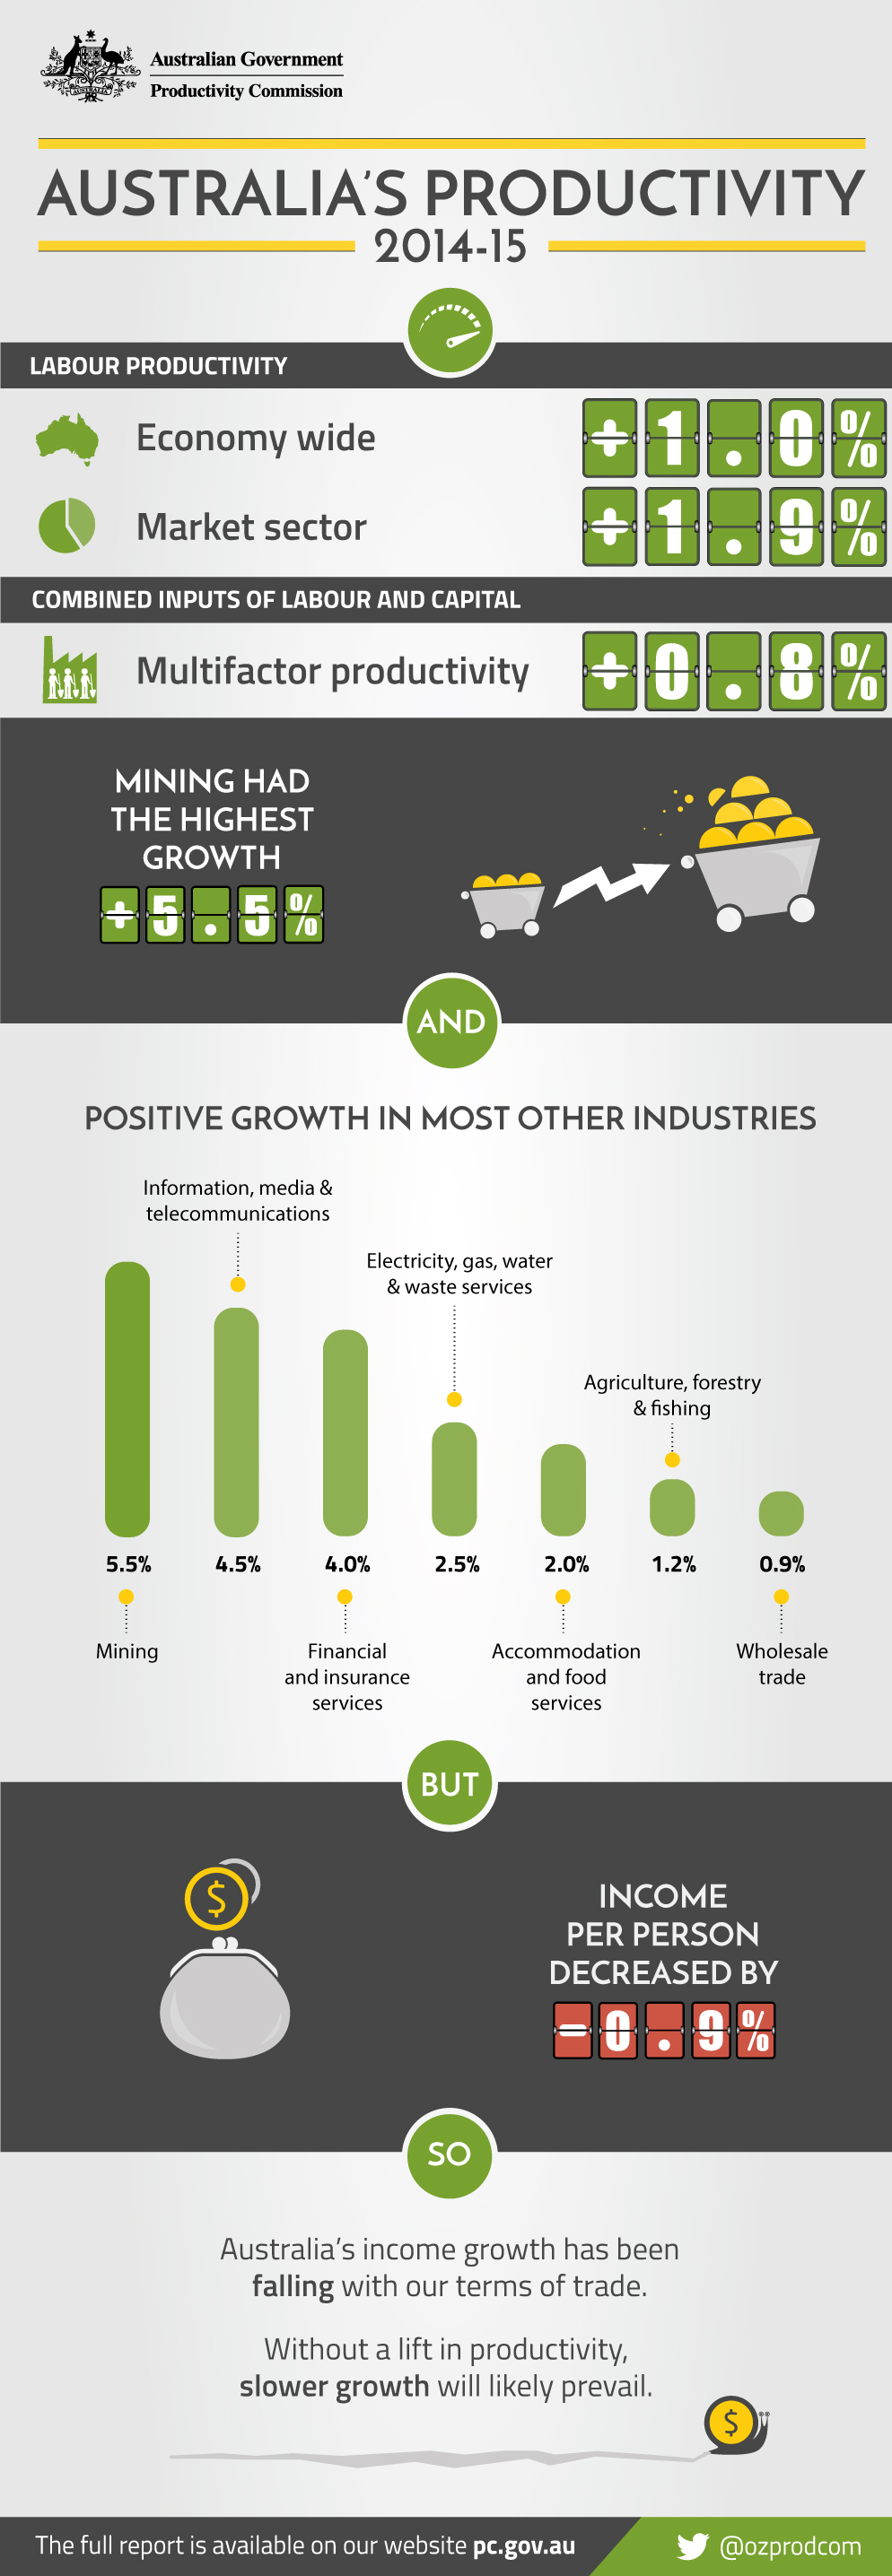 Text alternative of Australia's Productivity 2014-15 infographic follows this image.